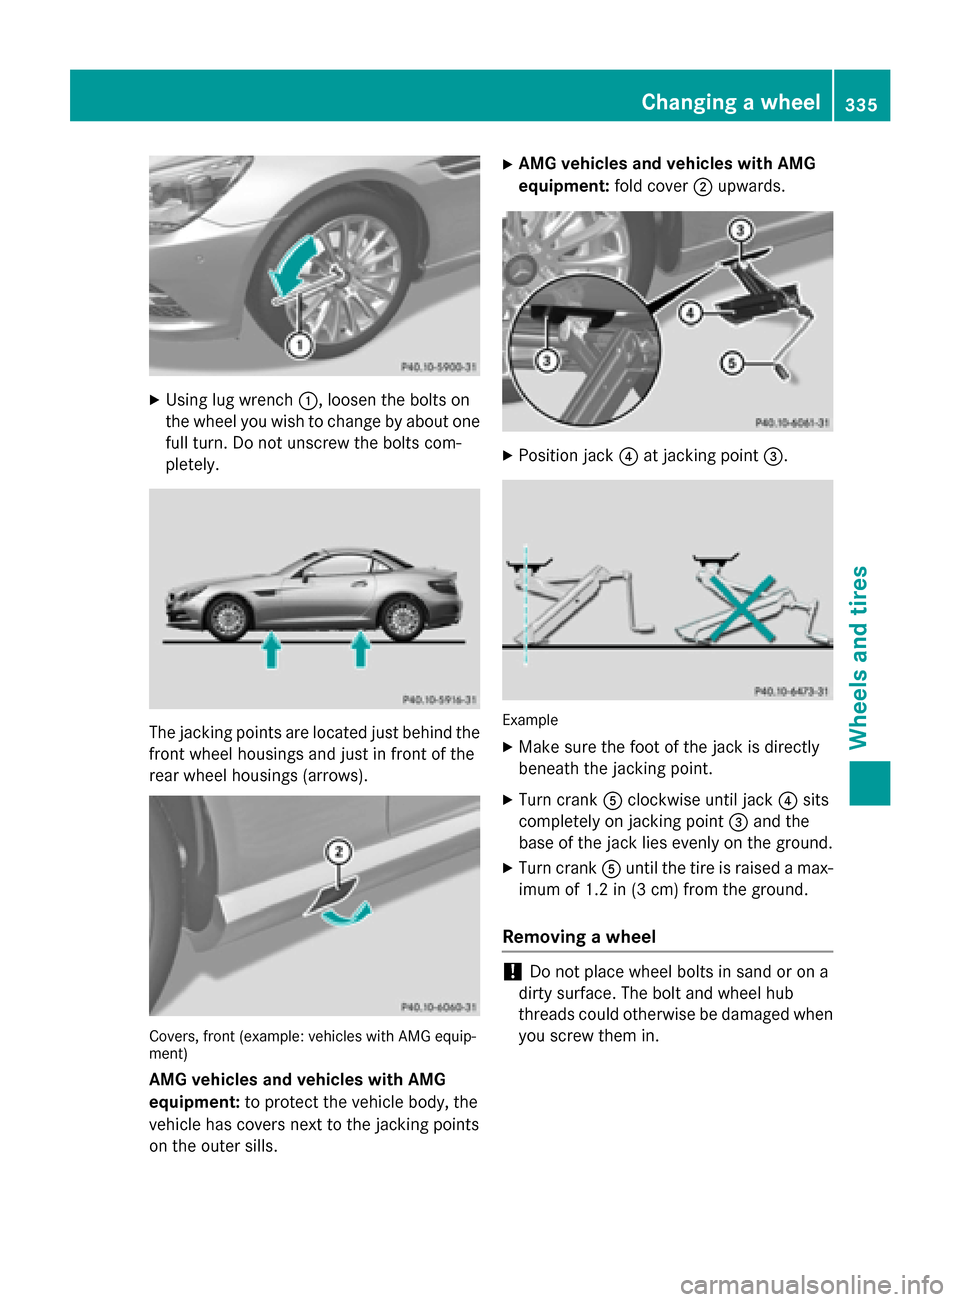 MERCEDES-BENZ SLK-Class 2015 R172 Owners Manual X
Using lug wrench 0043, loosen the bolts on
the wheel you wish to change by about one full turn. Do not unscrew the bolts com-
pletely. The jacking points are located just behind the
front wheel hous